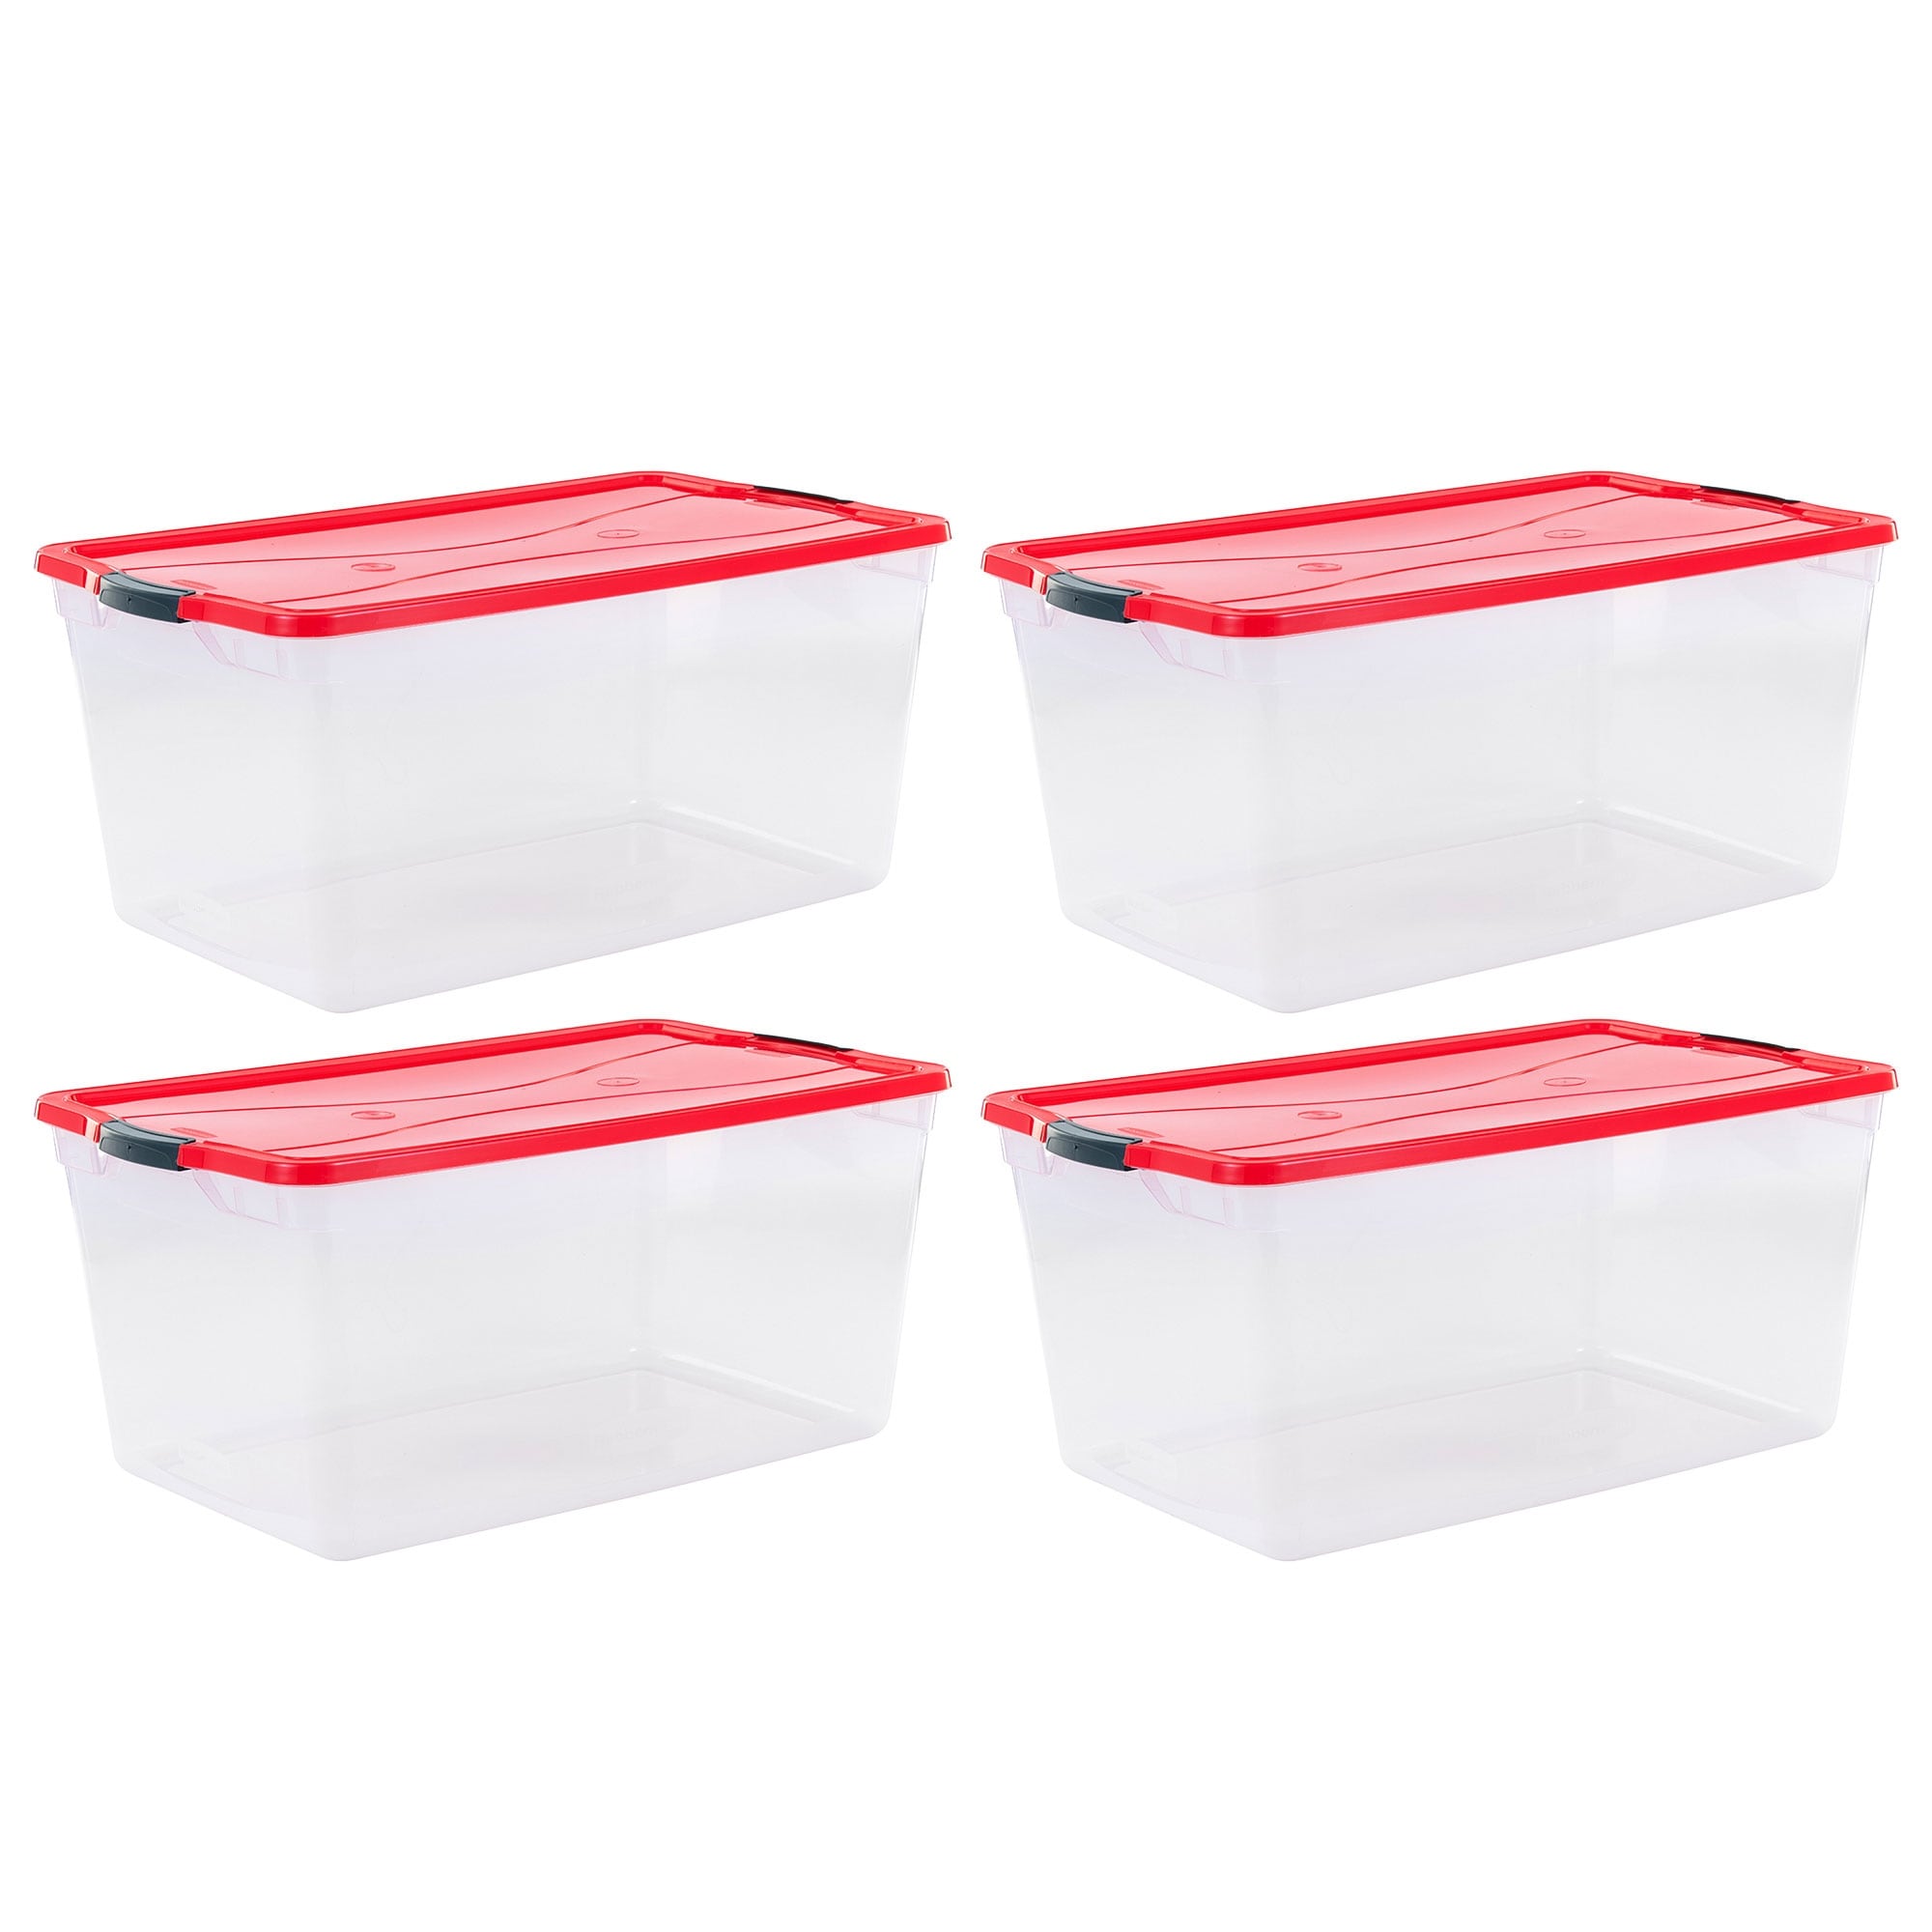 https://ak1.ostkcdn.com/images/products/is/images/direct/560870fb5e415a930df5261df70eb001d4a90f68/Rubbermaid-Cleverstore-18-Gal-Plastic-Holiday-Storage-Tote%2C-Clear-%26-Red%2C-4-Pack.jpg